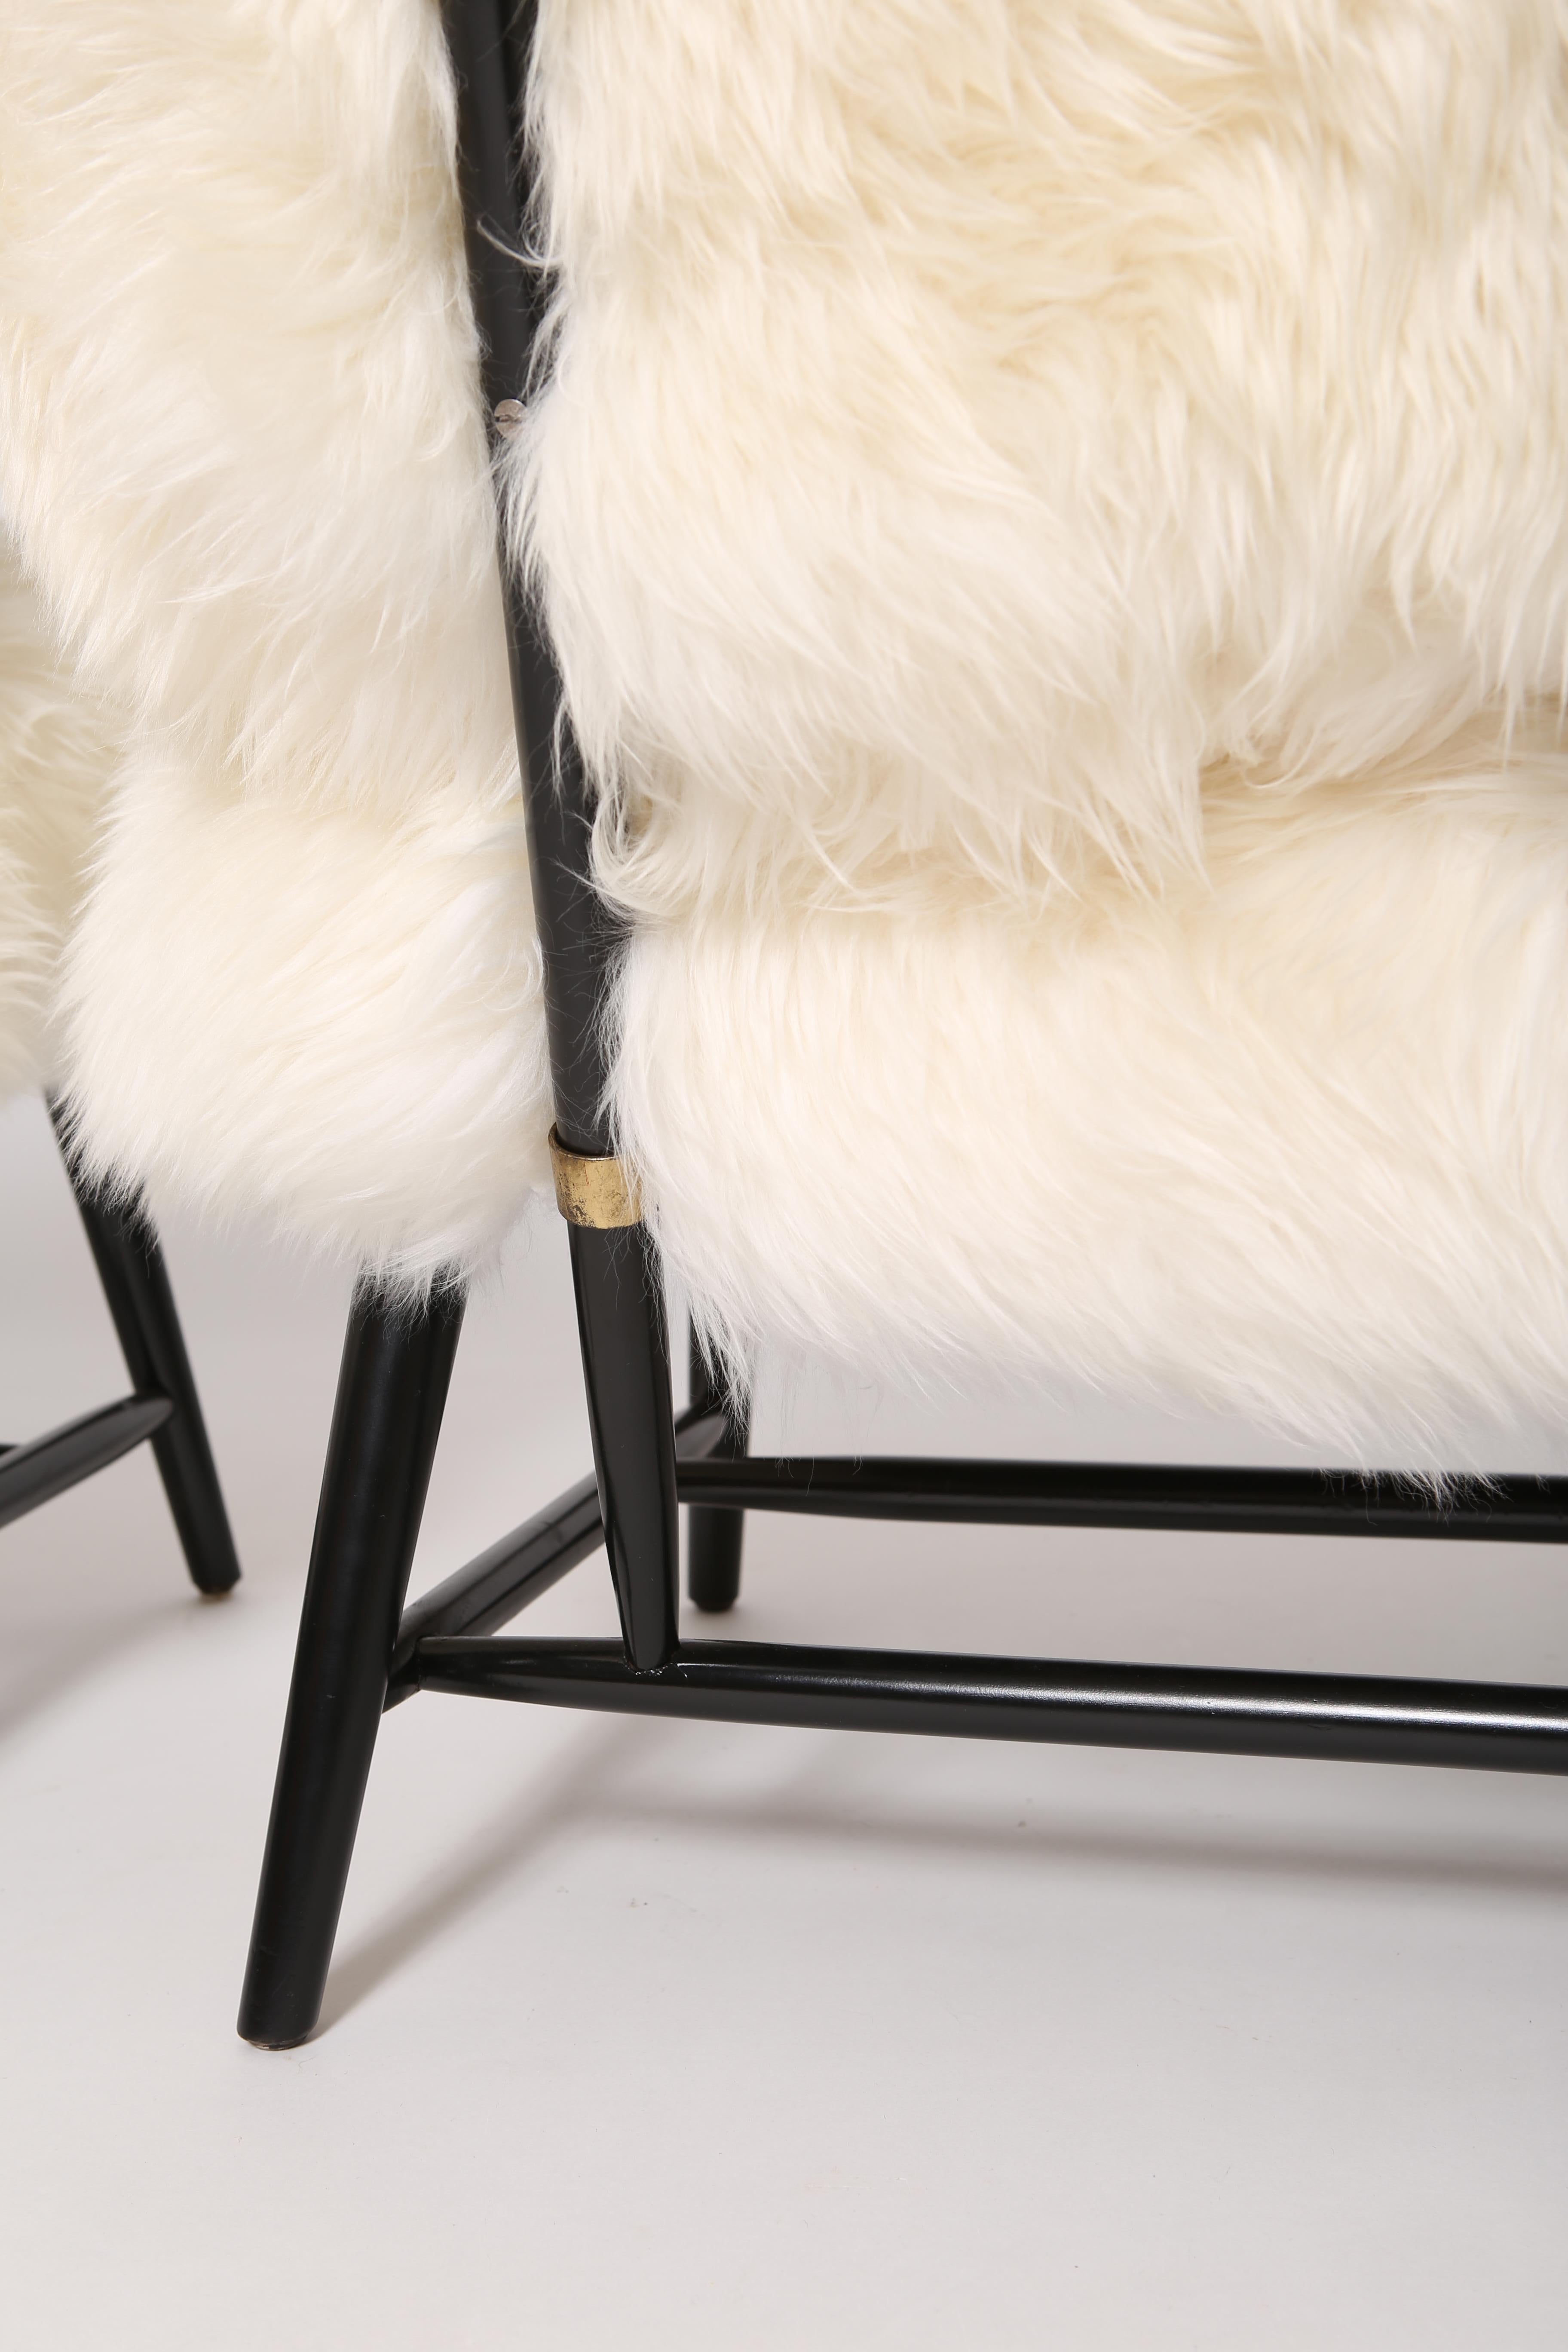 “TeVe” chairs, by Alf Svensson for Dux. Sold as a pair. Lacquered beech frames, brass hardware and redone in fluffy New Zealand shearling. These are wonderfully fluffy yet stout little slipper chairs- armless design is perfect for playing guitar